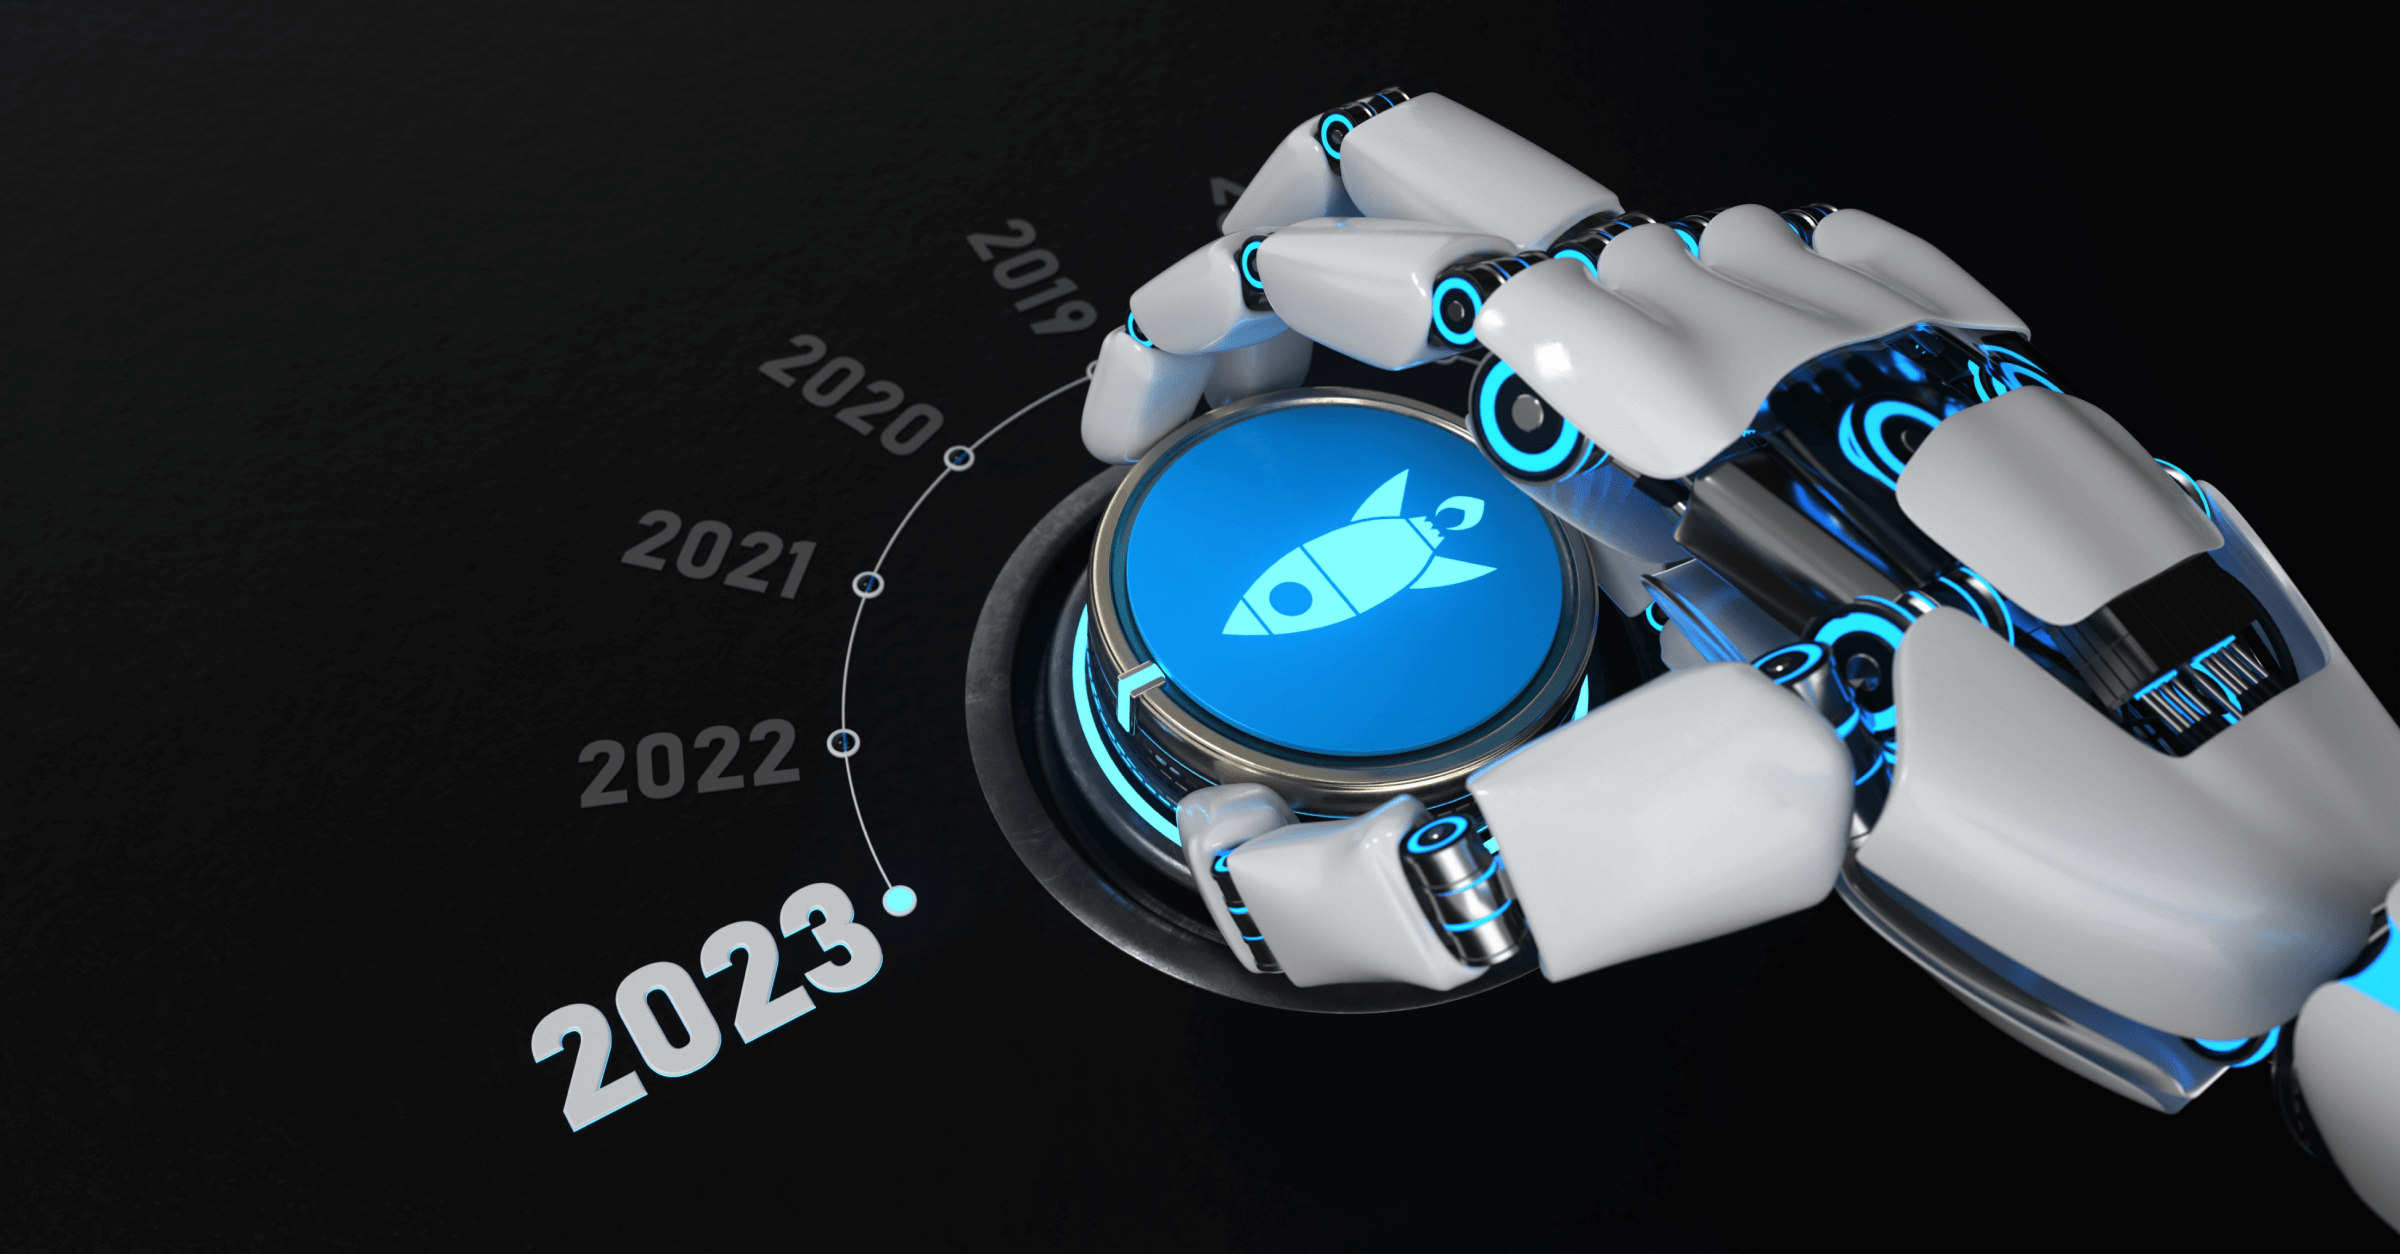 AI Trends in 2023: Analyzing Current AI Data Solutions and Business Integrations—and Predicting What Artificial Intelligence Evolutions May Follow